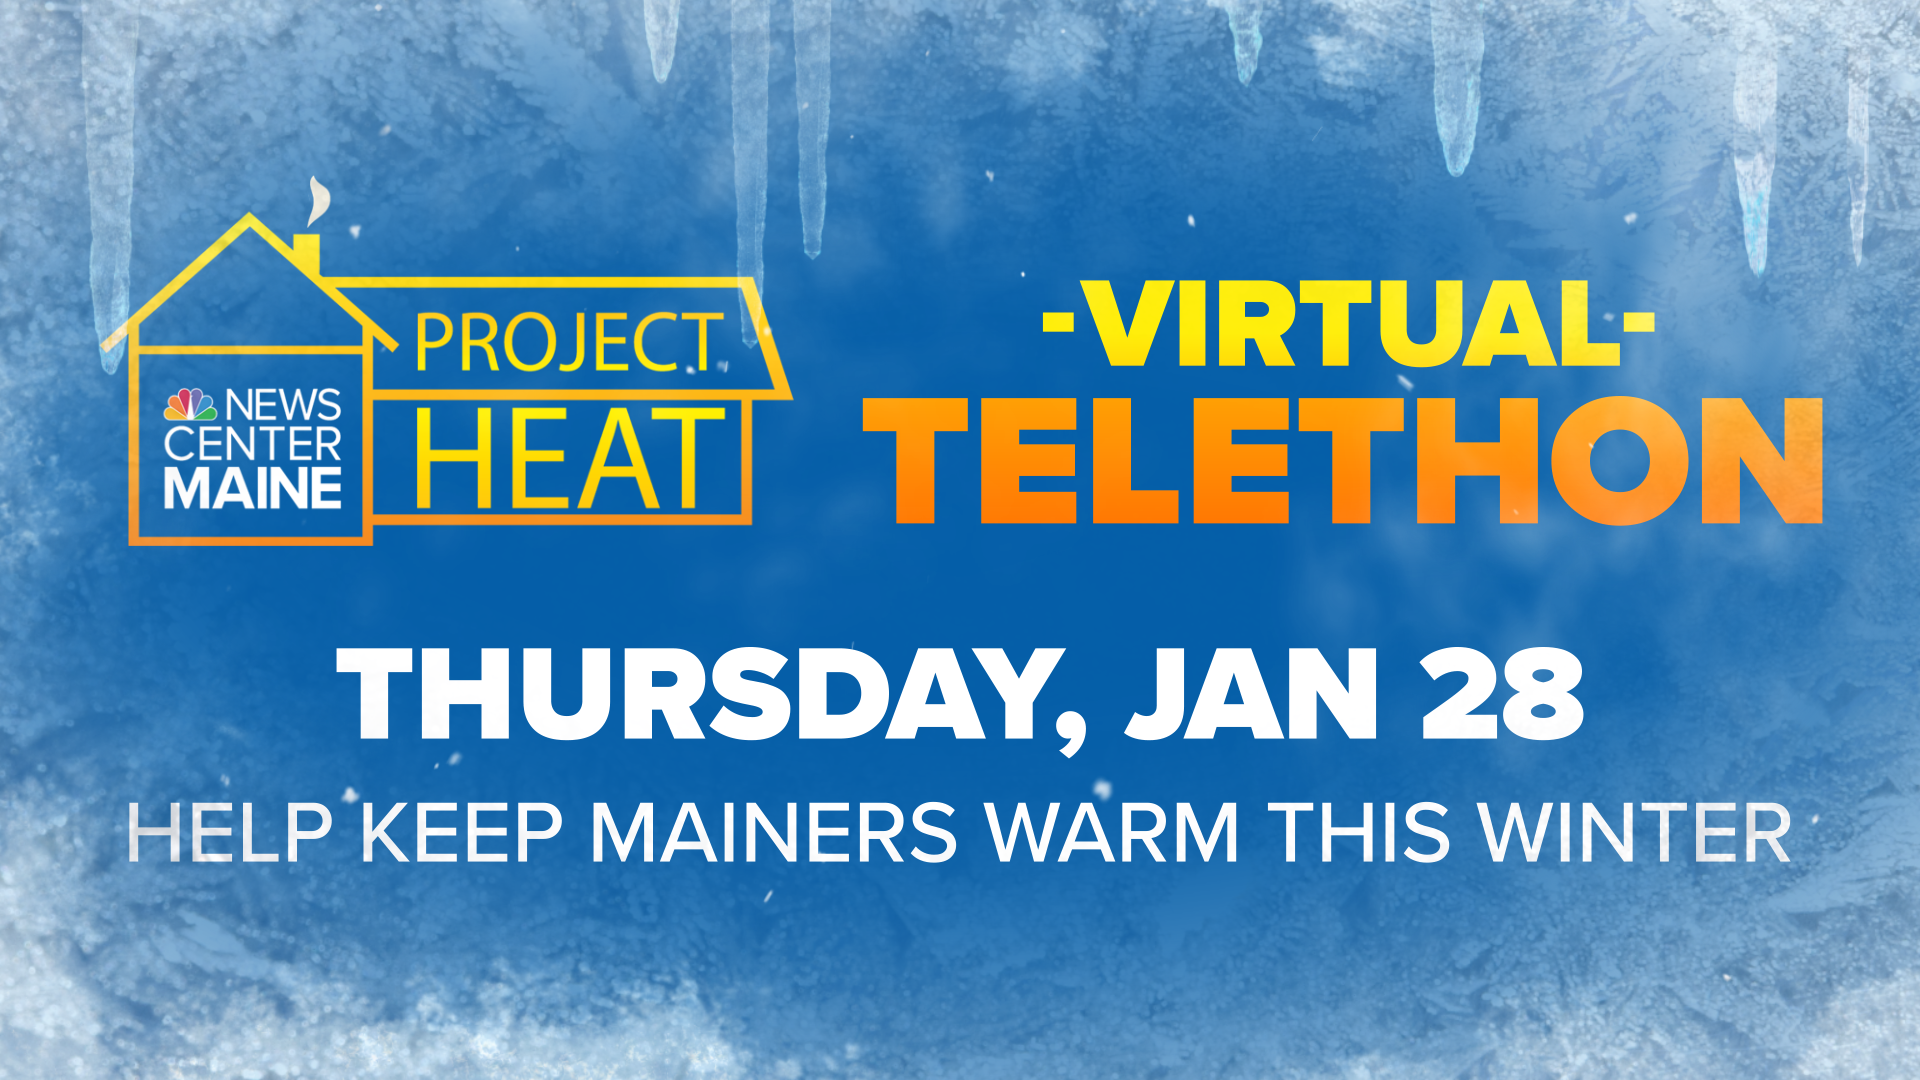 Thursday, January 28 NEWS CENTER Maine will partner with United Way to raise money for The Keep Me Warm Fund for heating assistance in Maine.